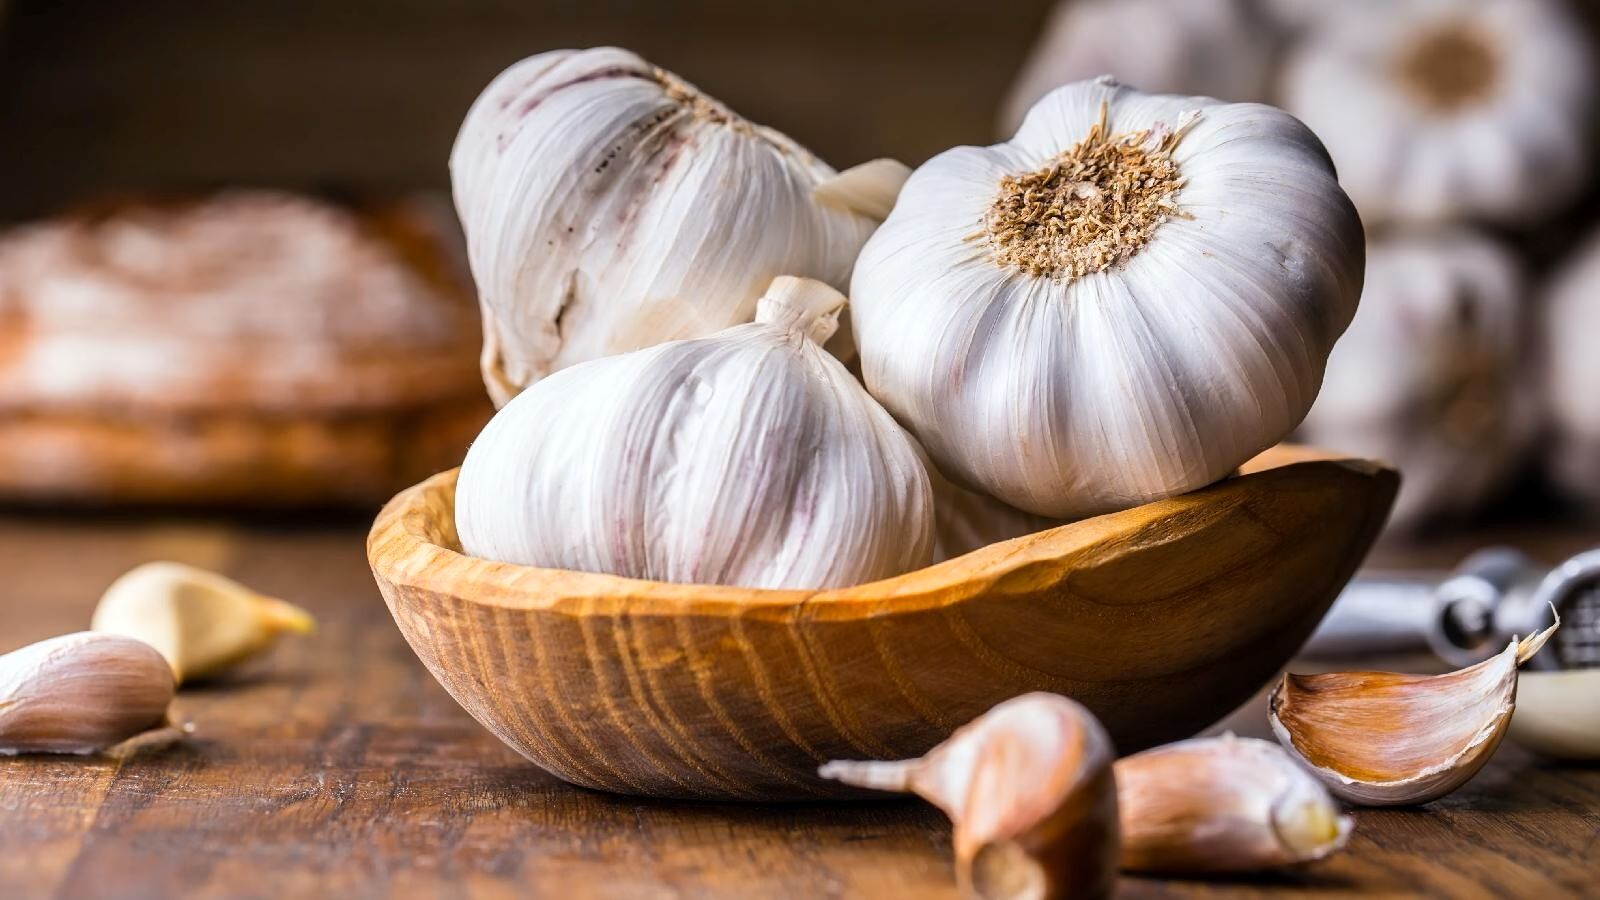 How To Store Garlic So It Doesn’T Smell